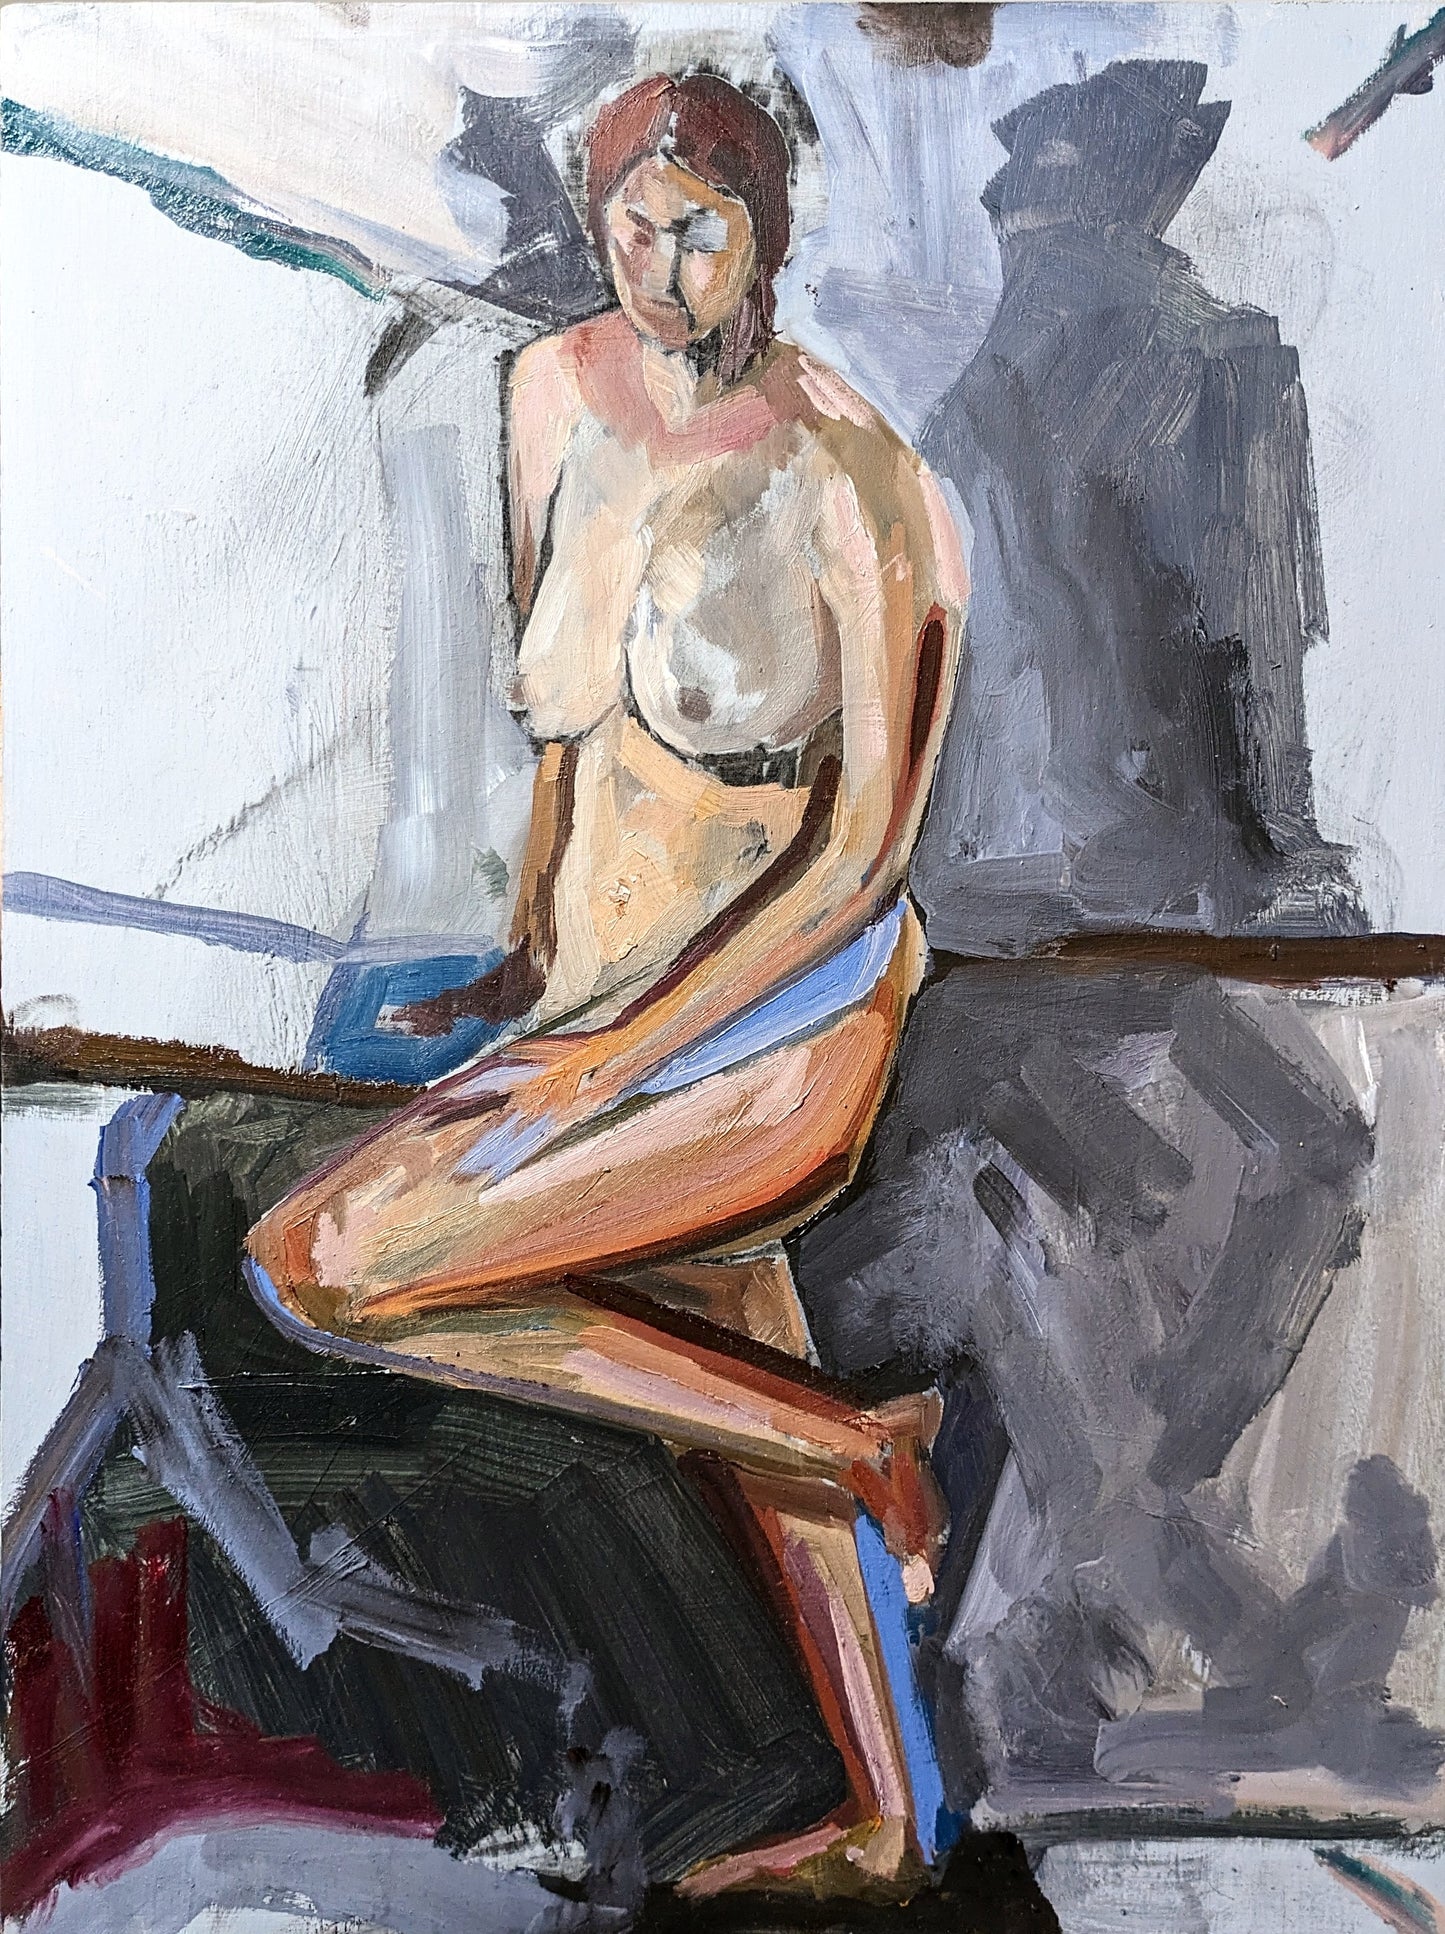 ‘Woman Bathing’ by Melissa Clements